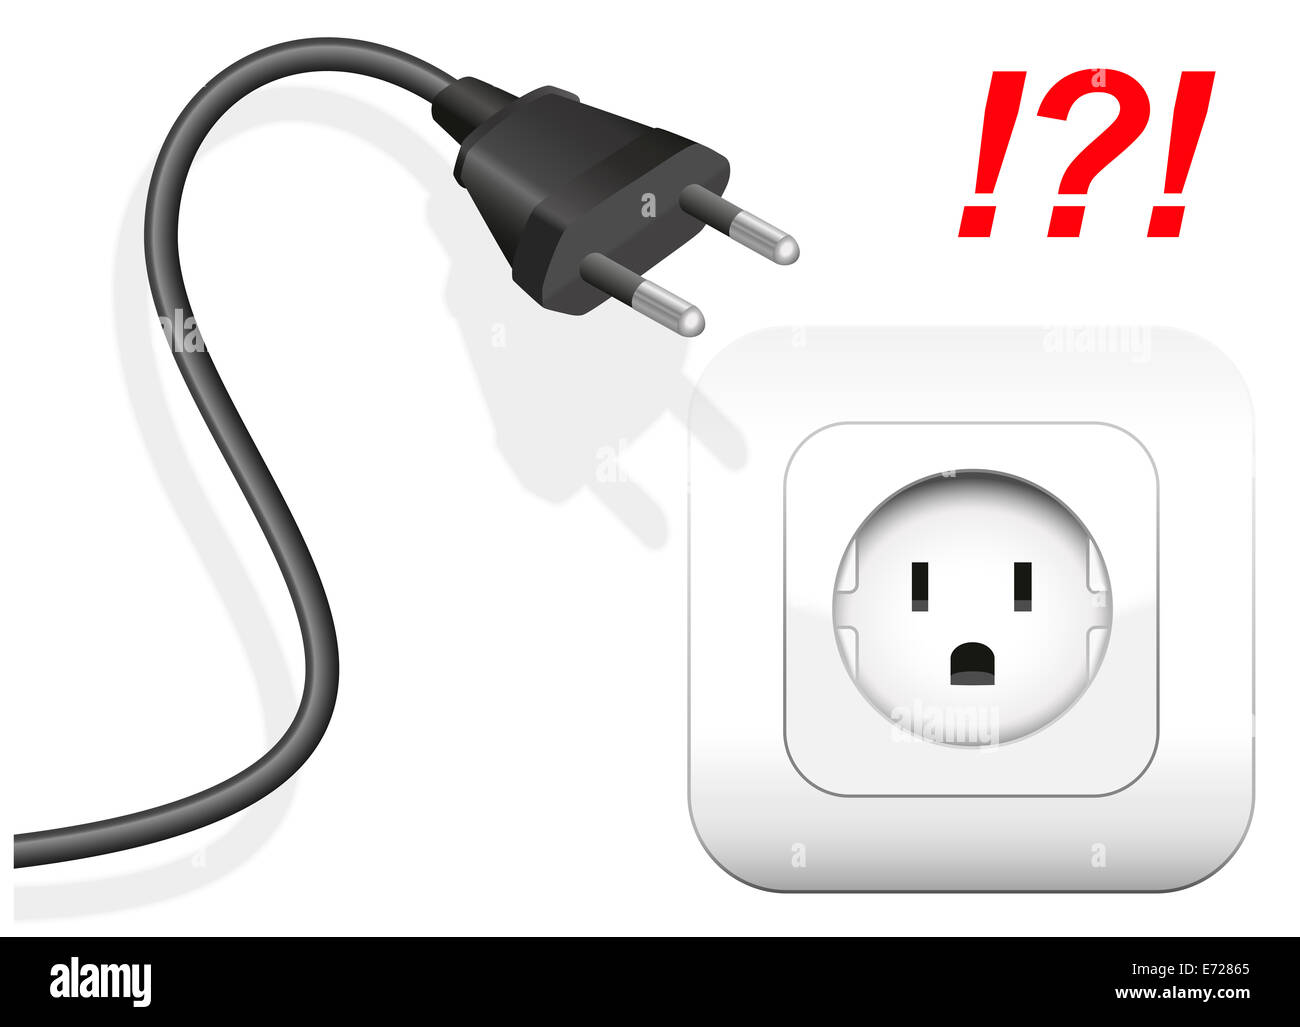 Socket and plug that are not compatible. The plug has round metal pins, but the socket is applied for flat pins. Stock Photo